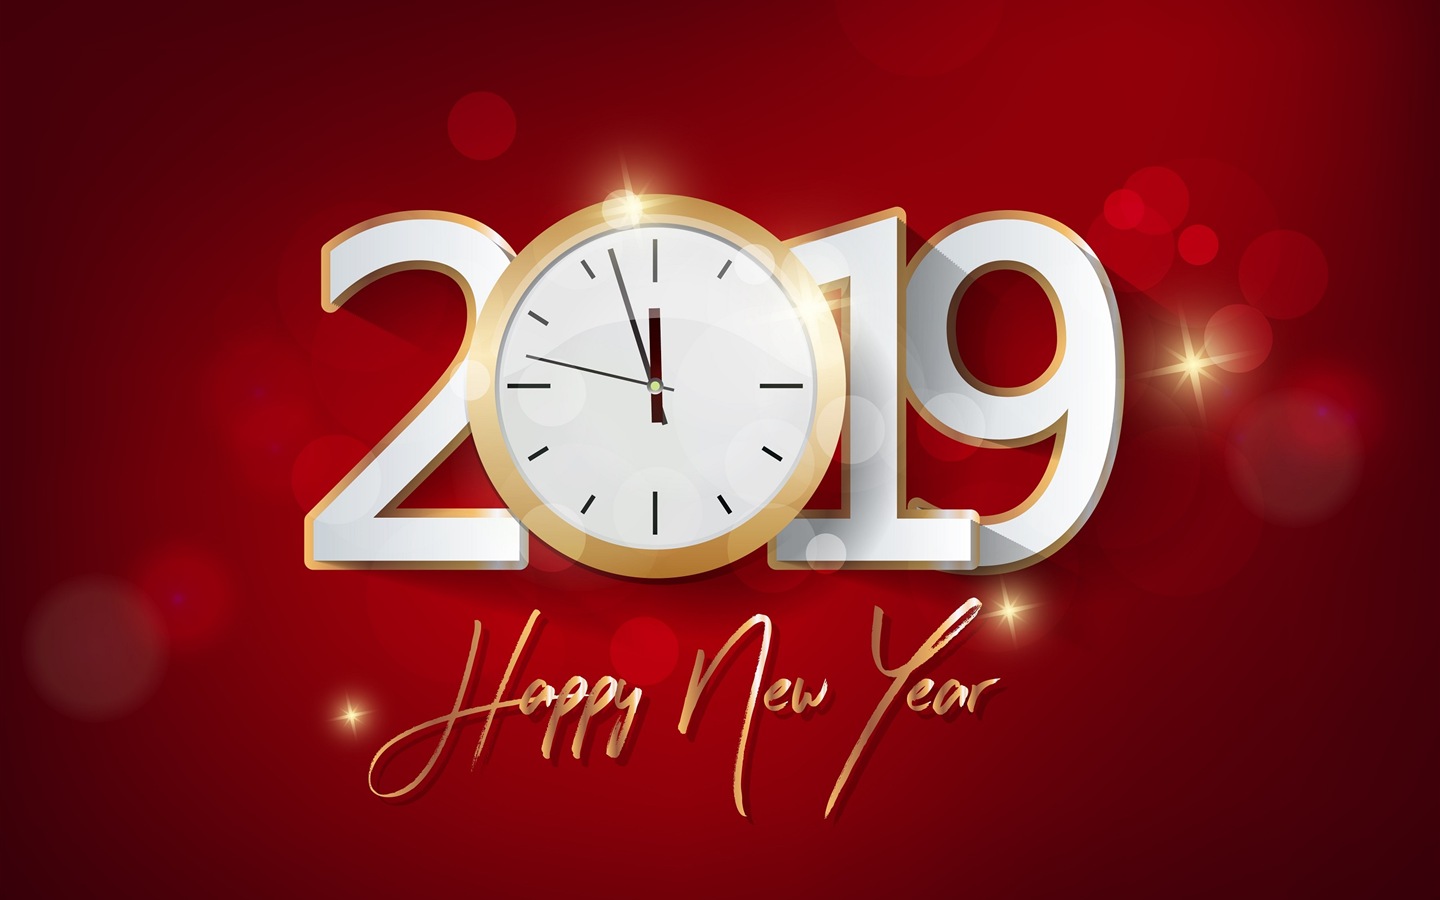 Happy New Year 2019 HD wallpapers #8 - 1440x900